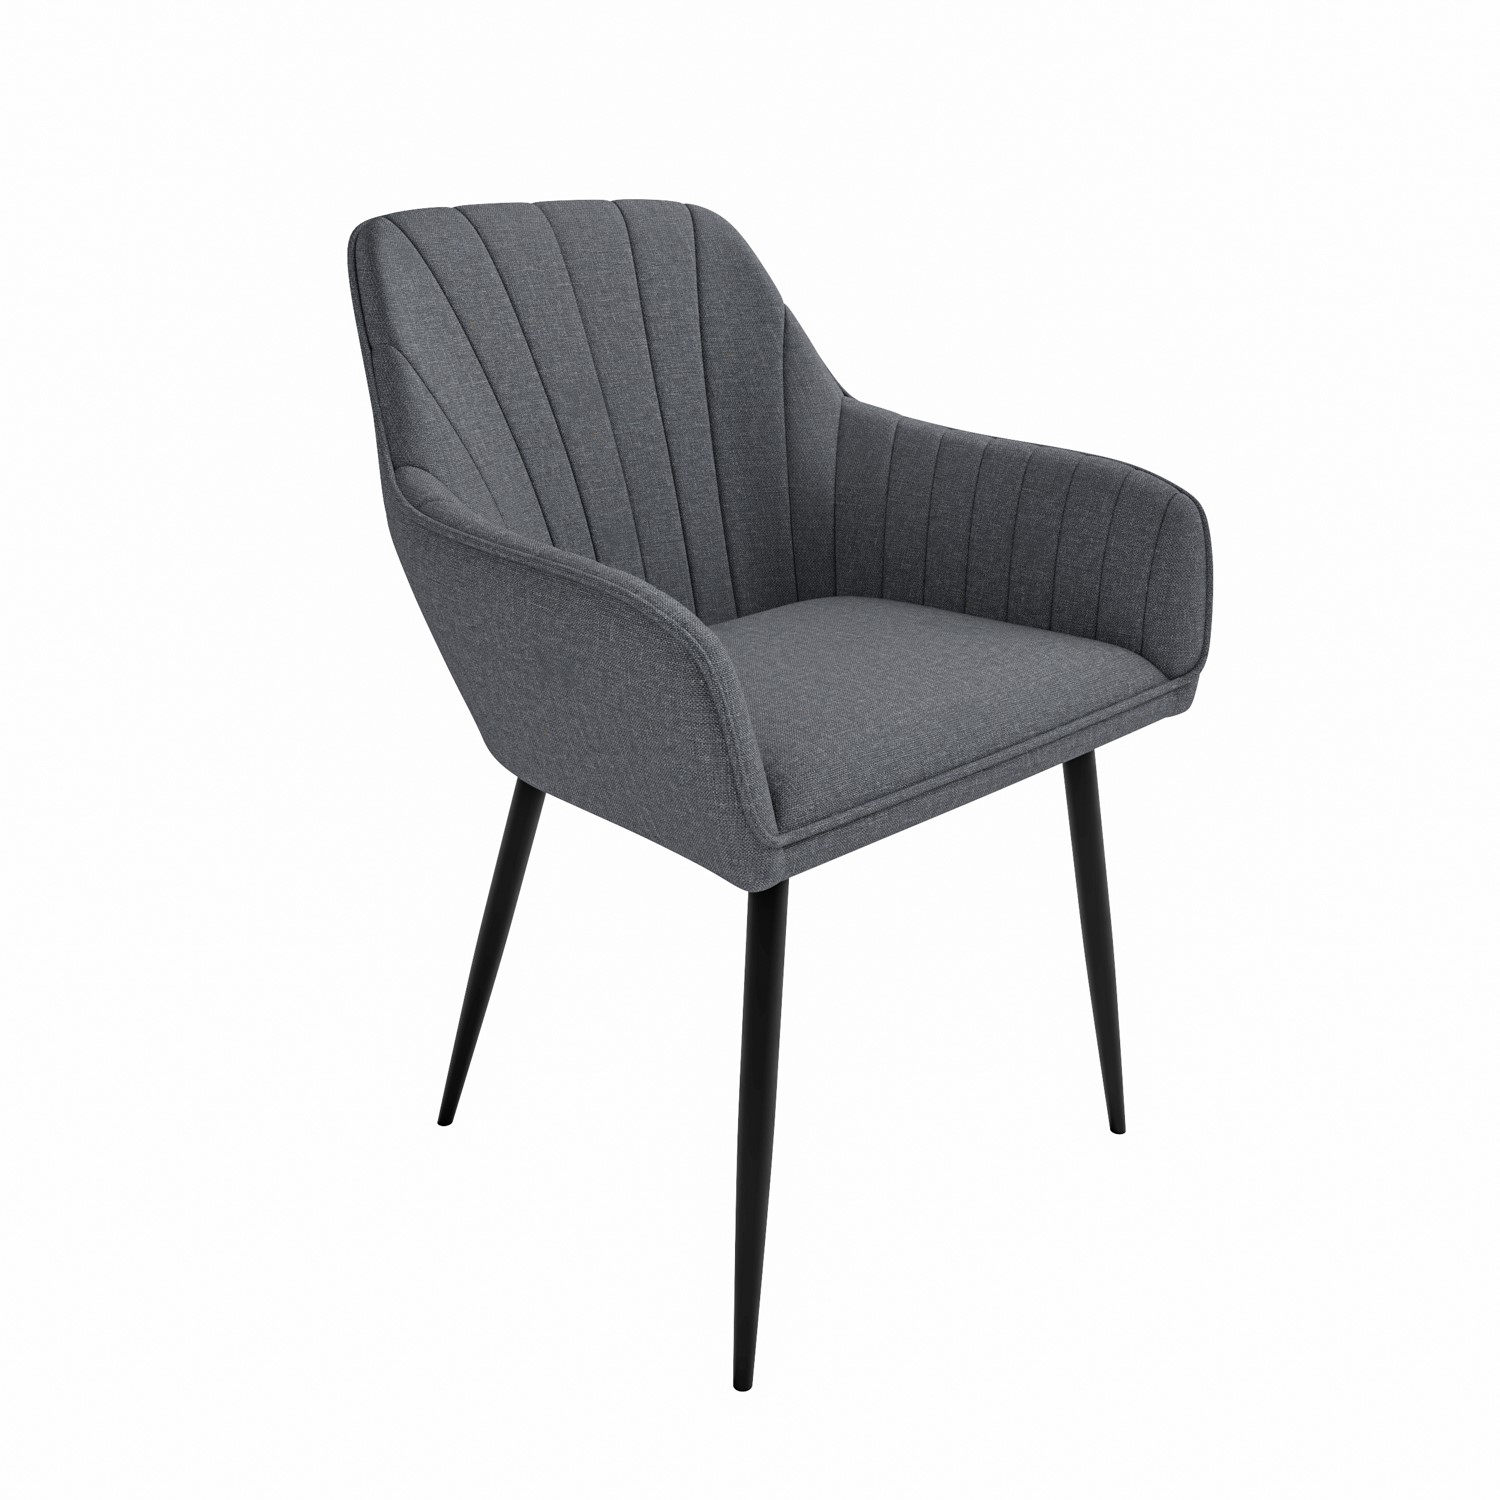 Read more about Set of 2 grey fabric tub dining chairs logan